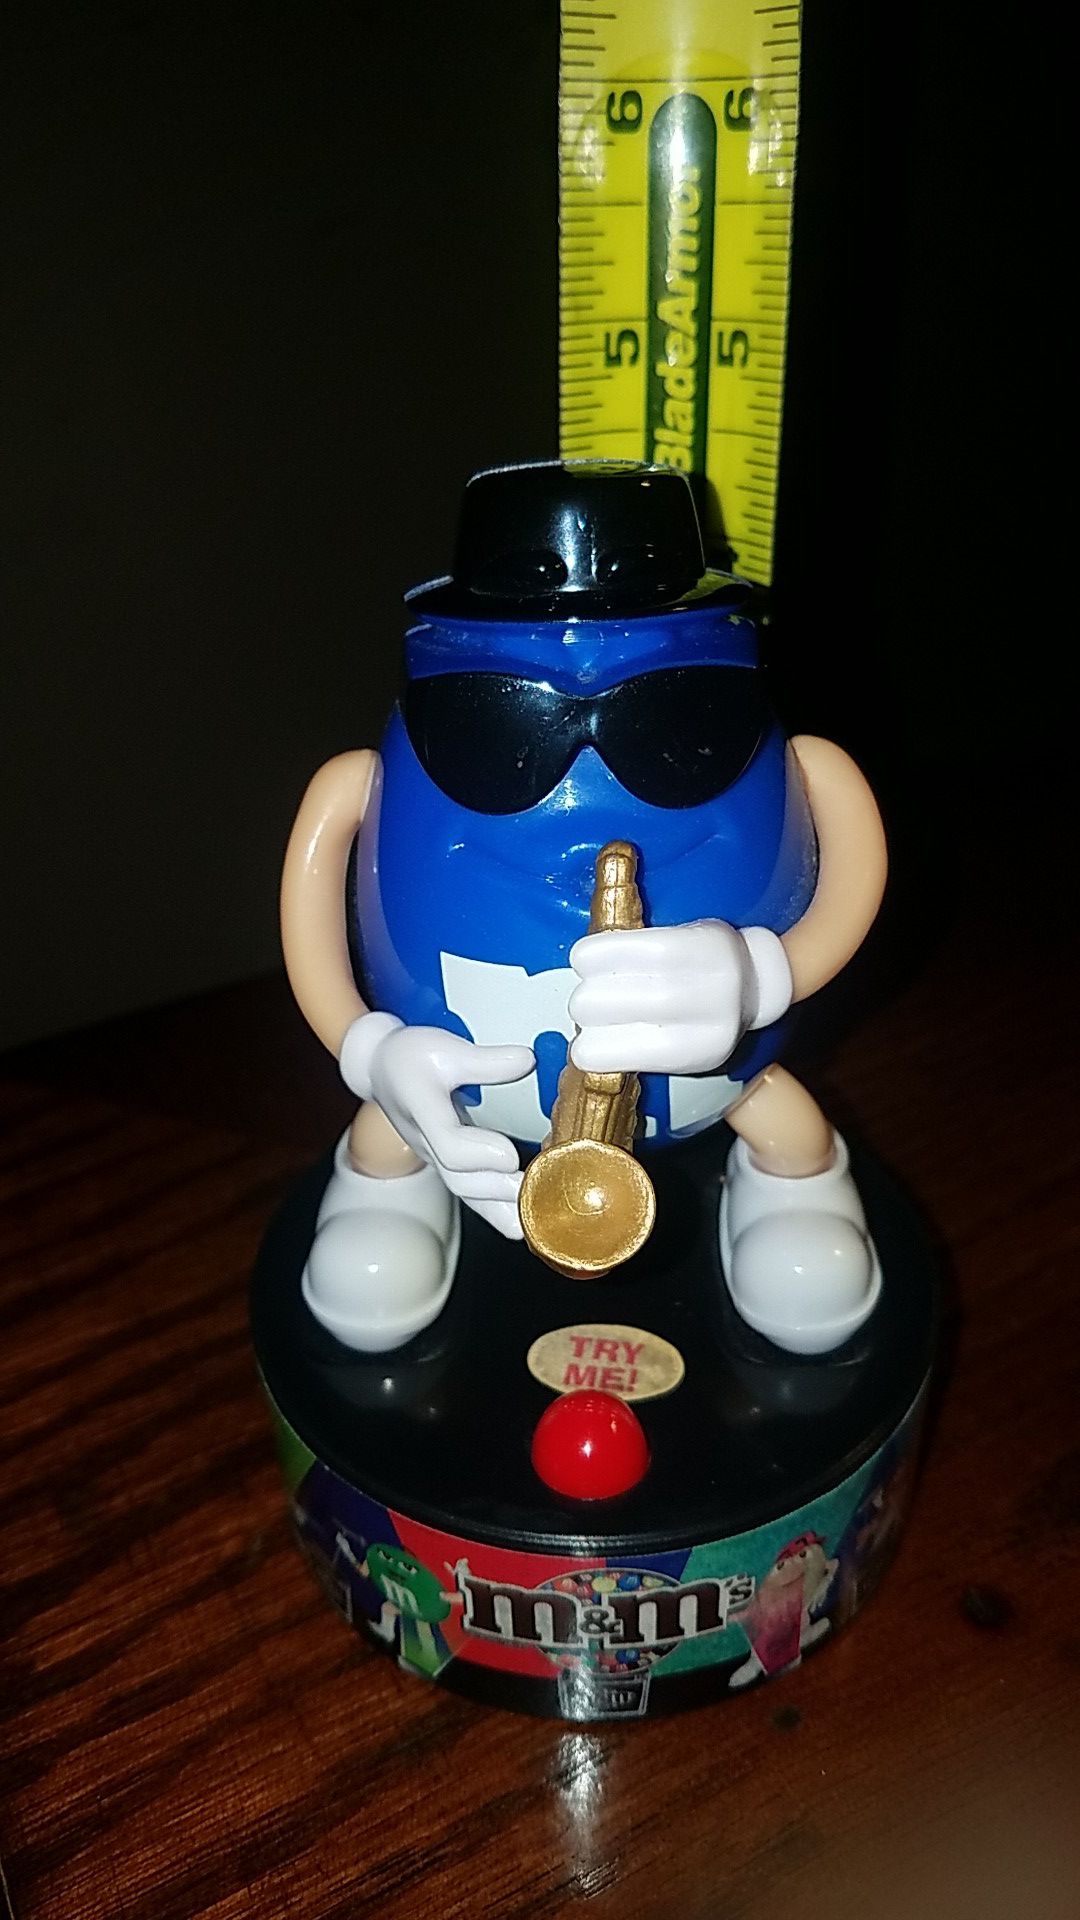 Blue M&M plays a cool saxophone tune when the button is pushed.